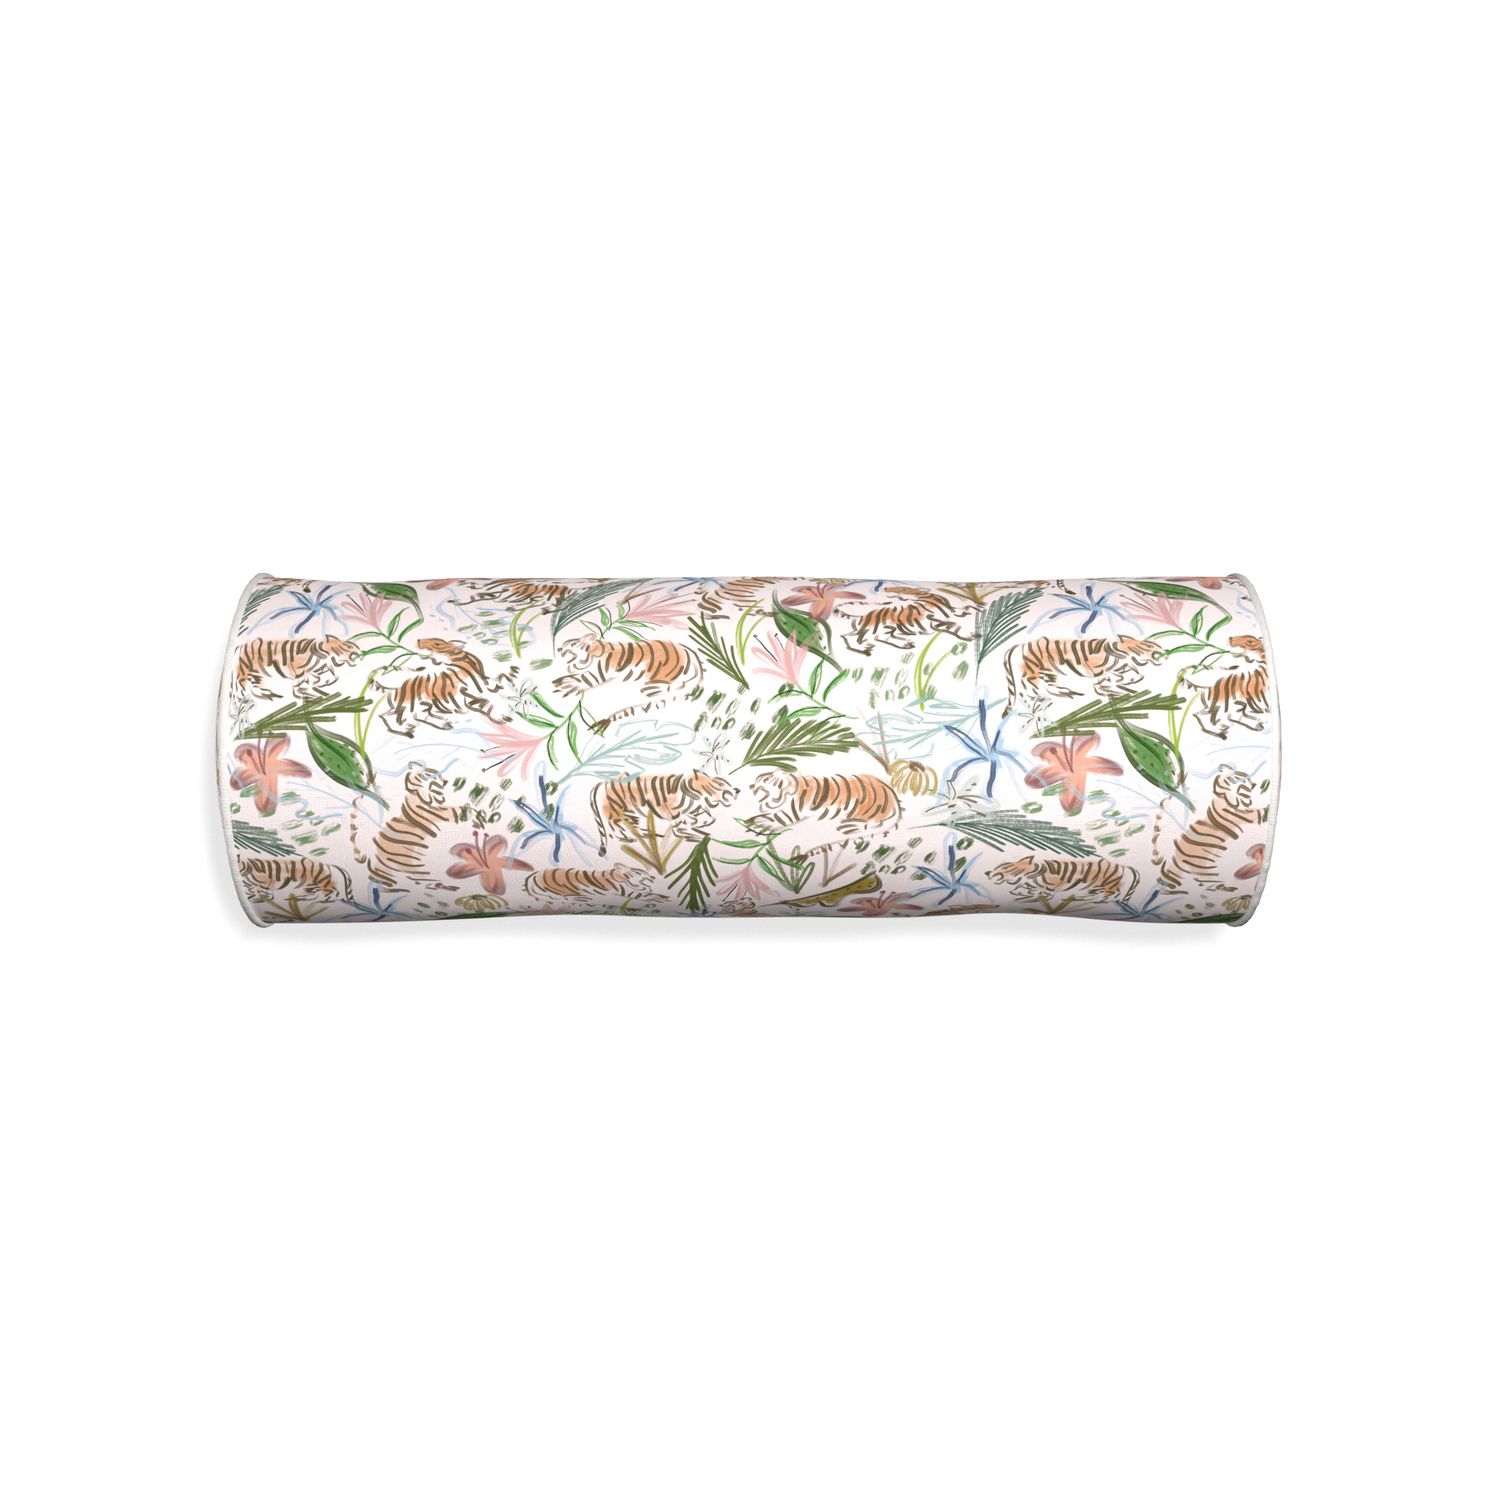 Bolster frida pink custom pink chinoiserie tigerpillow with snow piping on white background